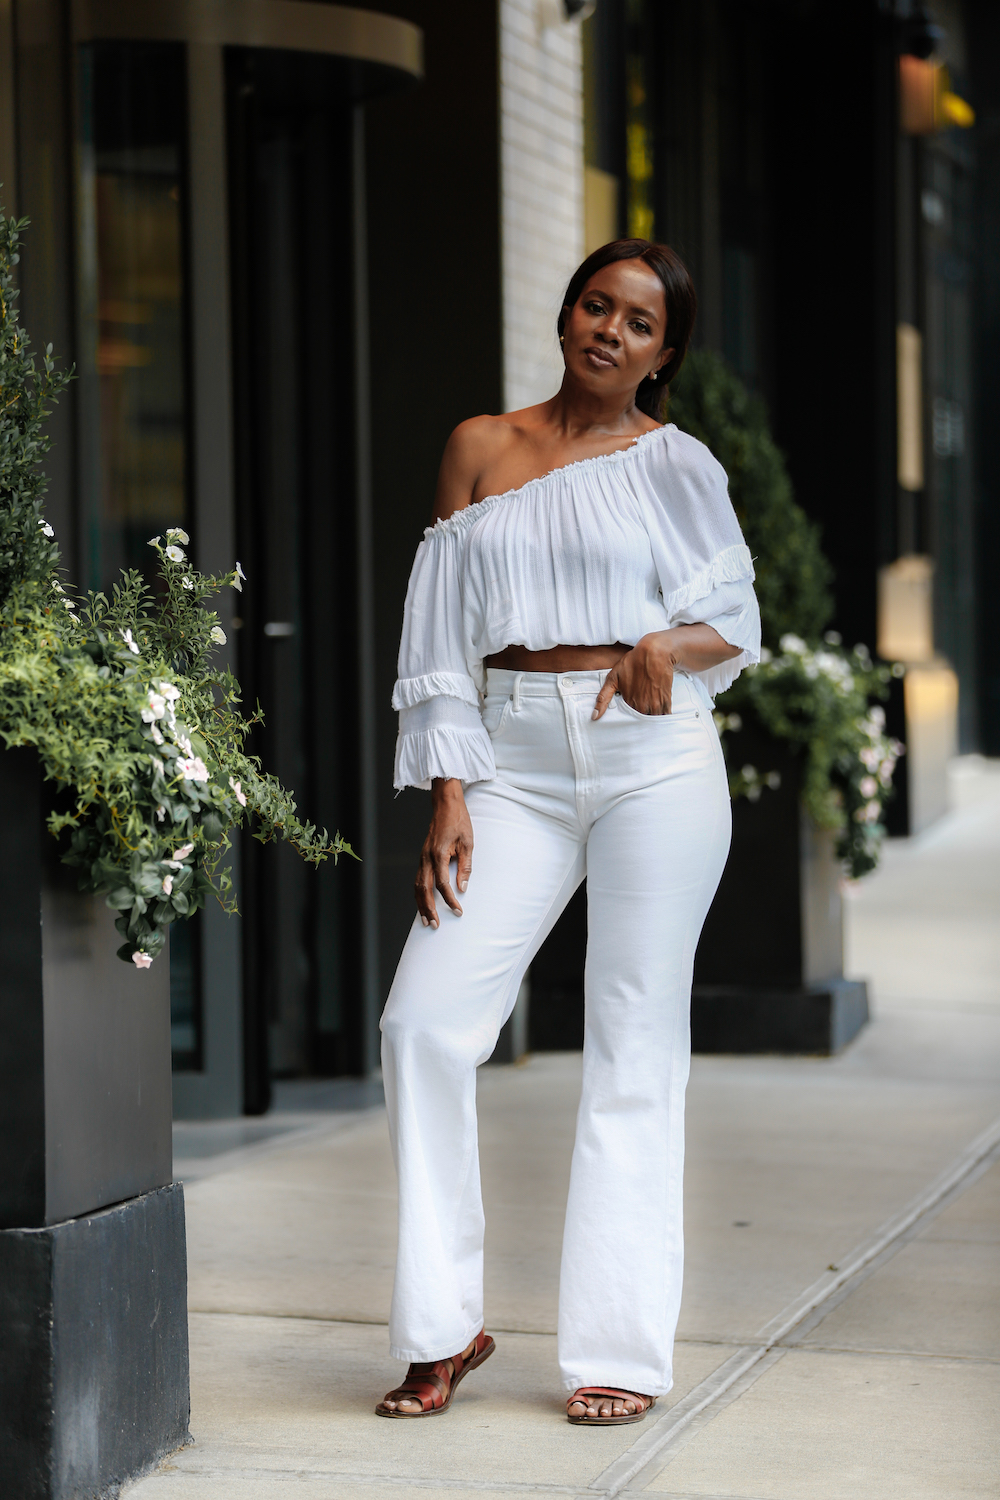 Summer White Outfits, One Shoulder Tops, White Pants